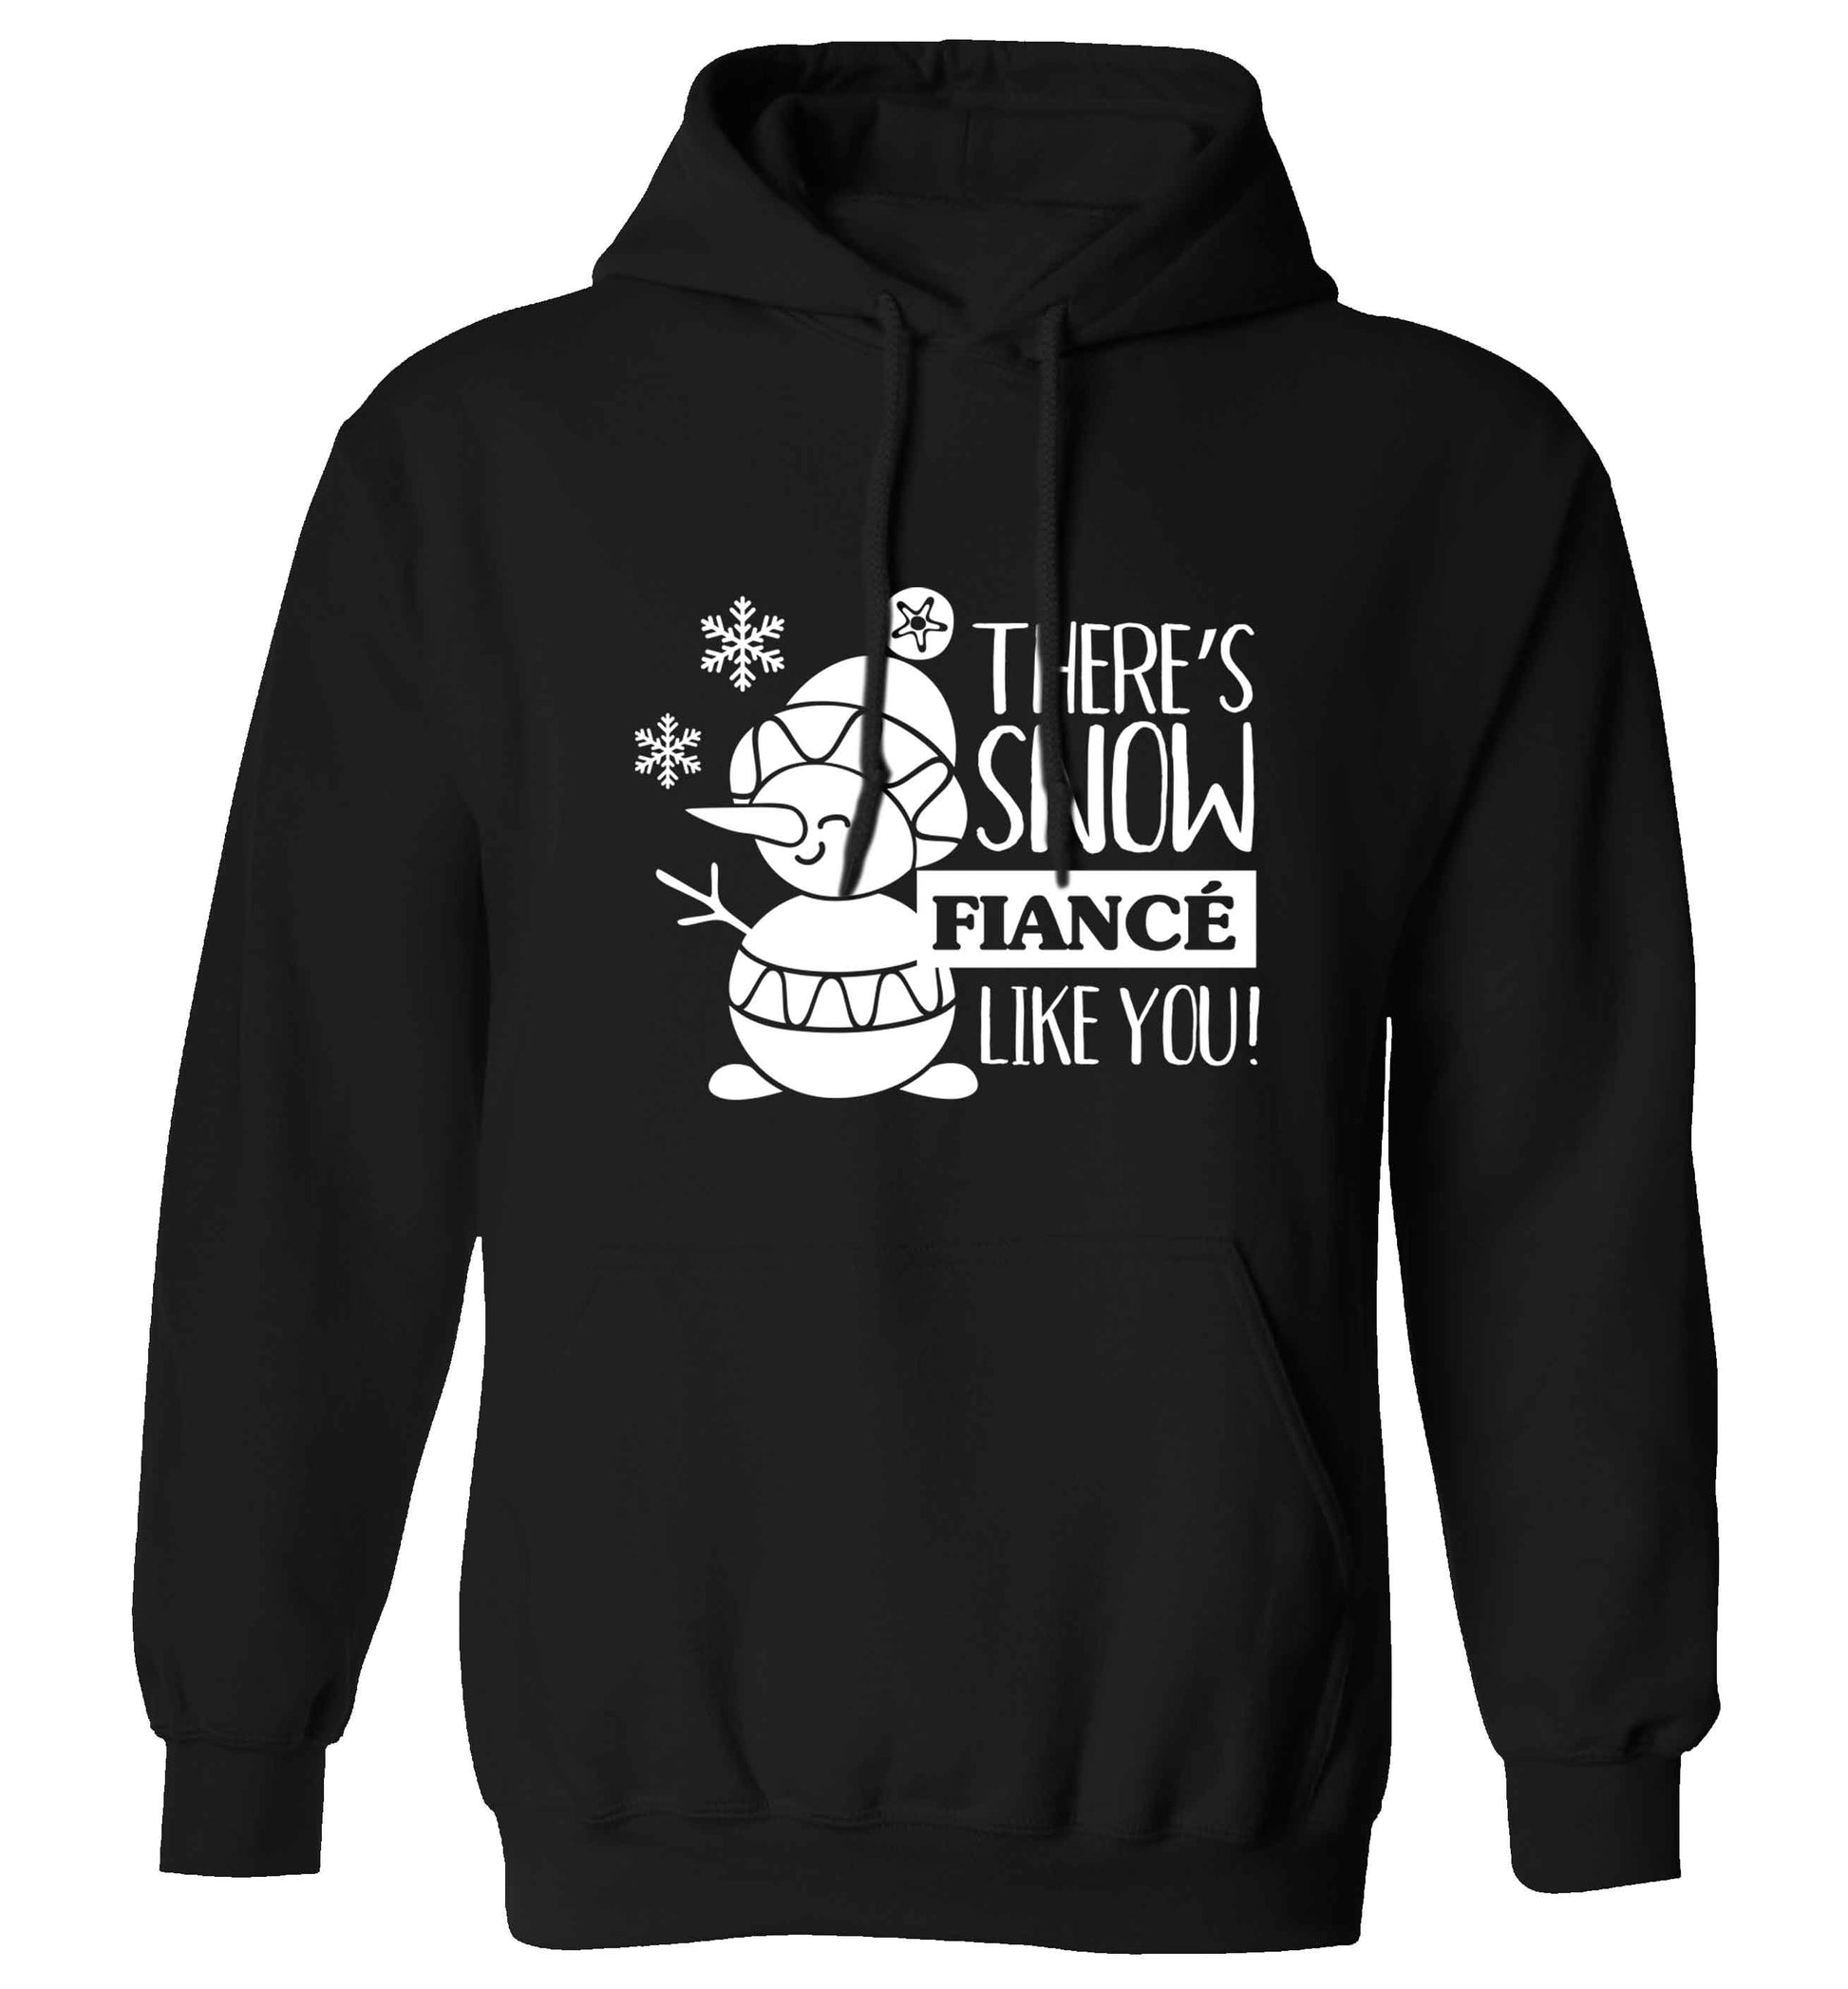 There's snow fiance like you adults unisex black hoodie 2XL